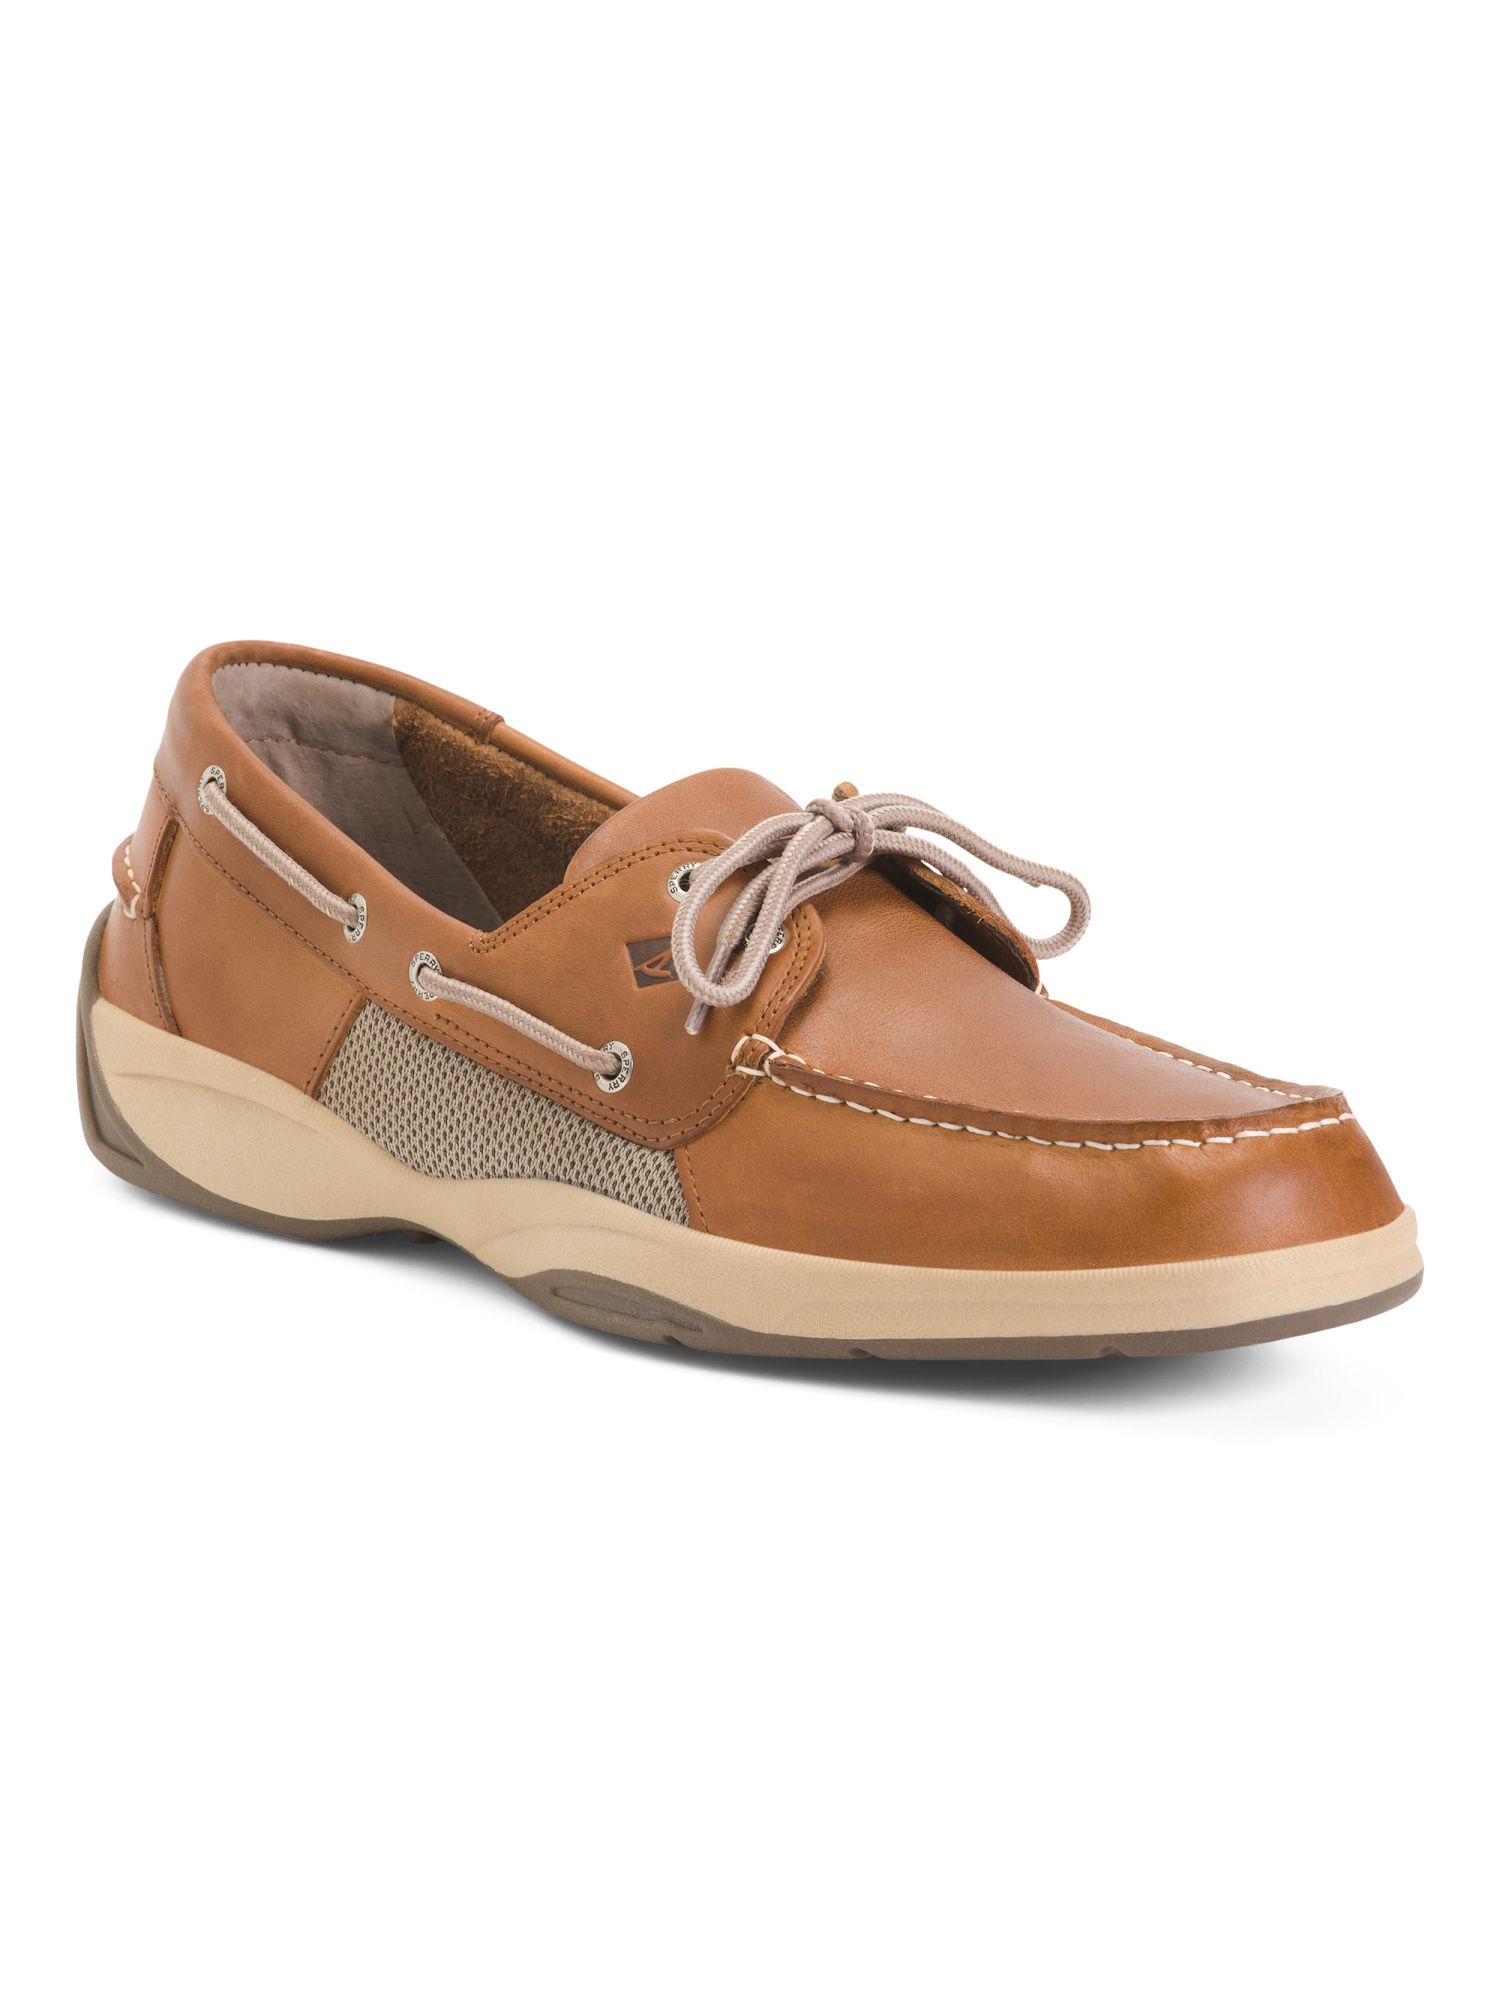 Men's Leather Lace Up Boat Shoes With Extended Sizes | Father's Day Gifts | Marshalls | Marshalls